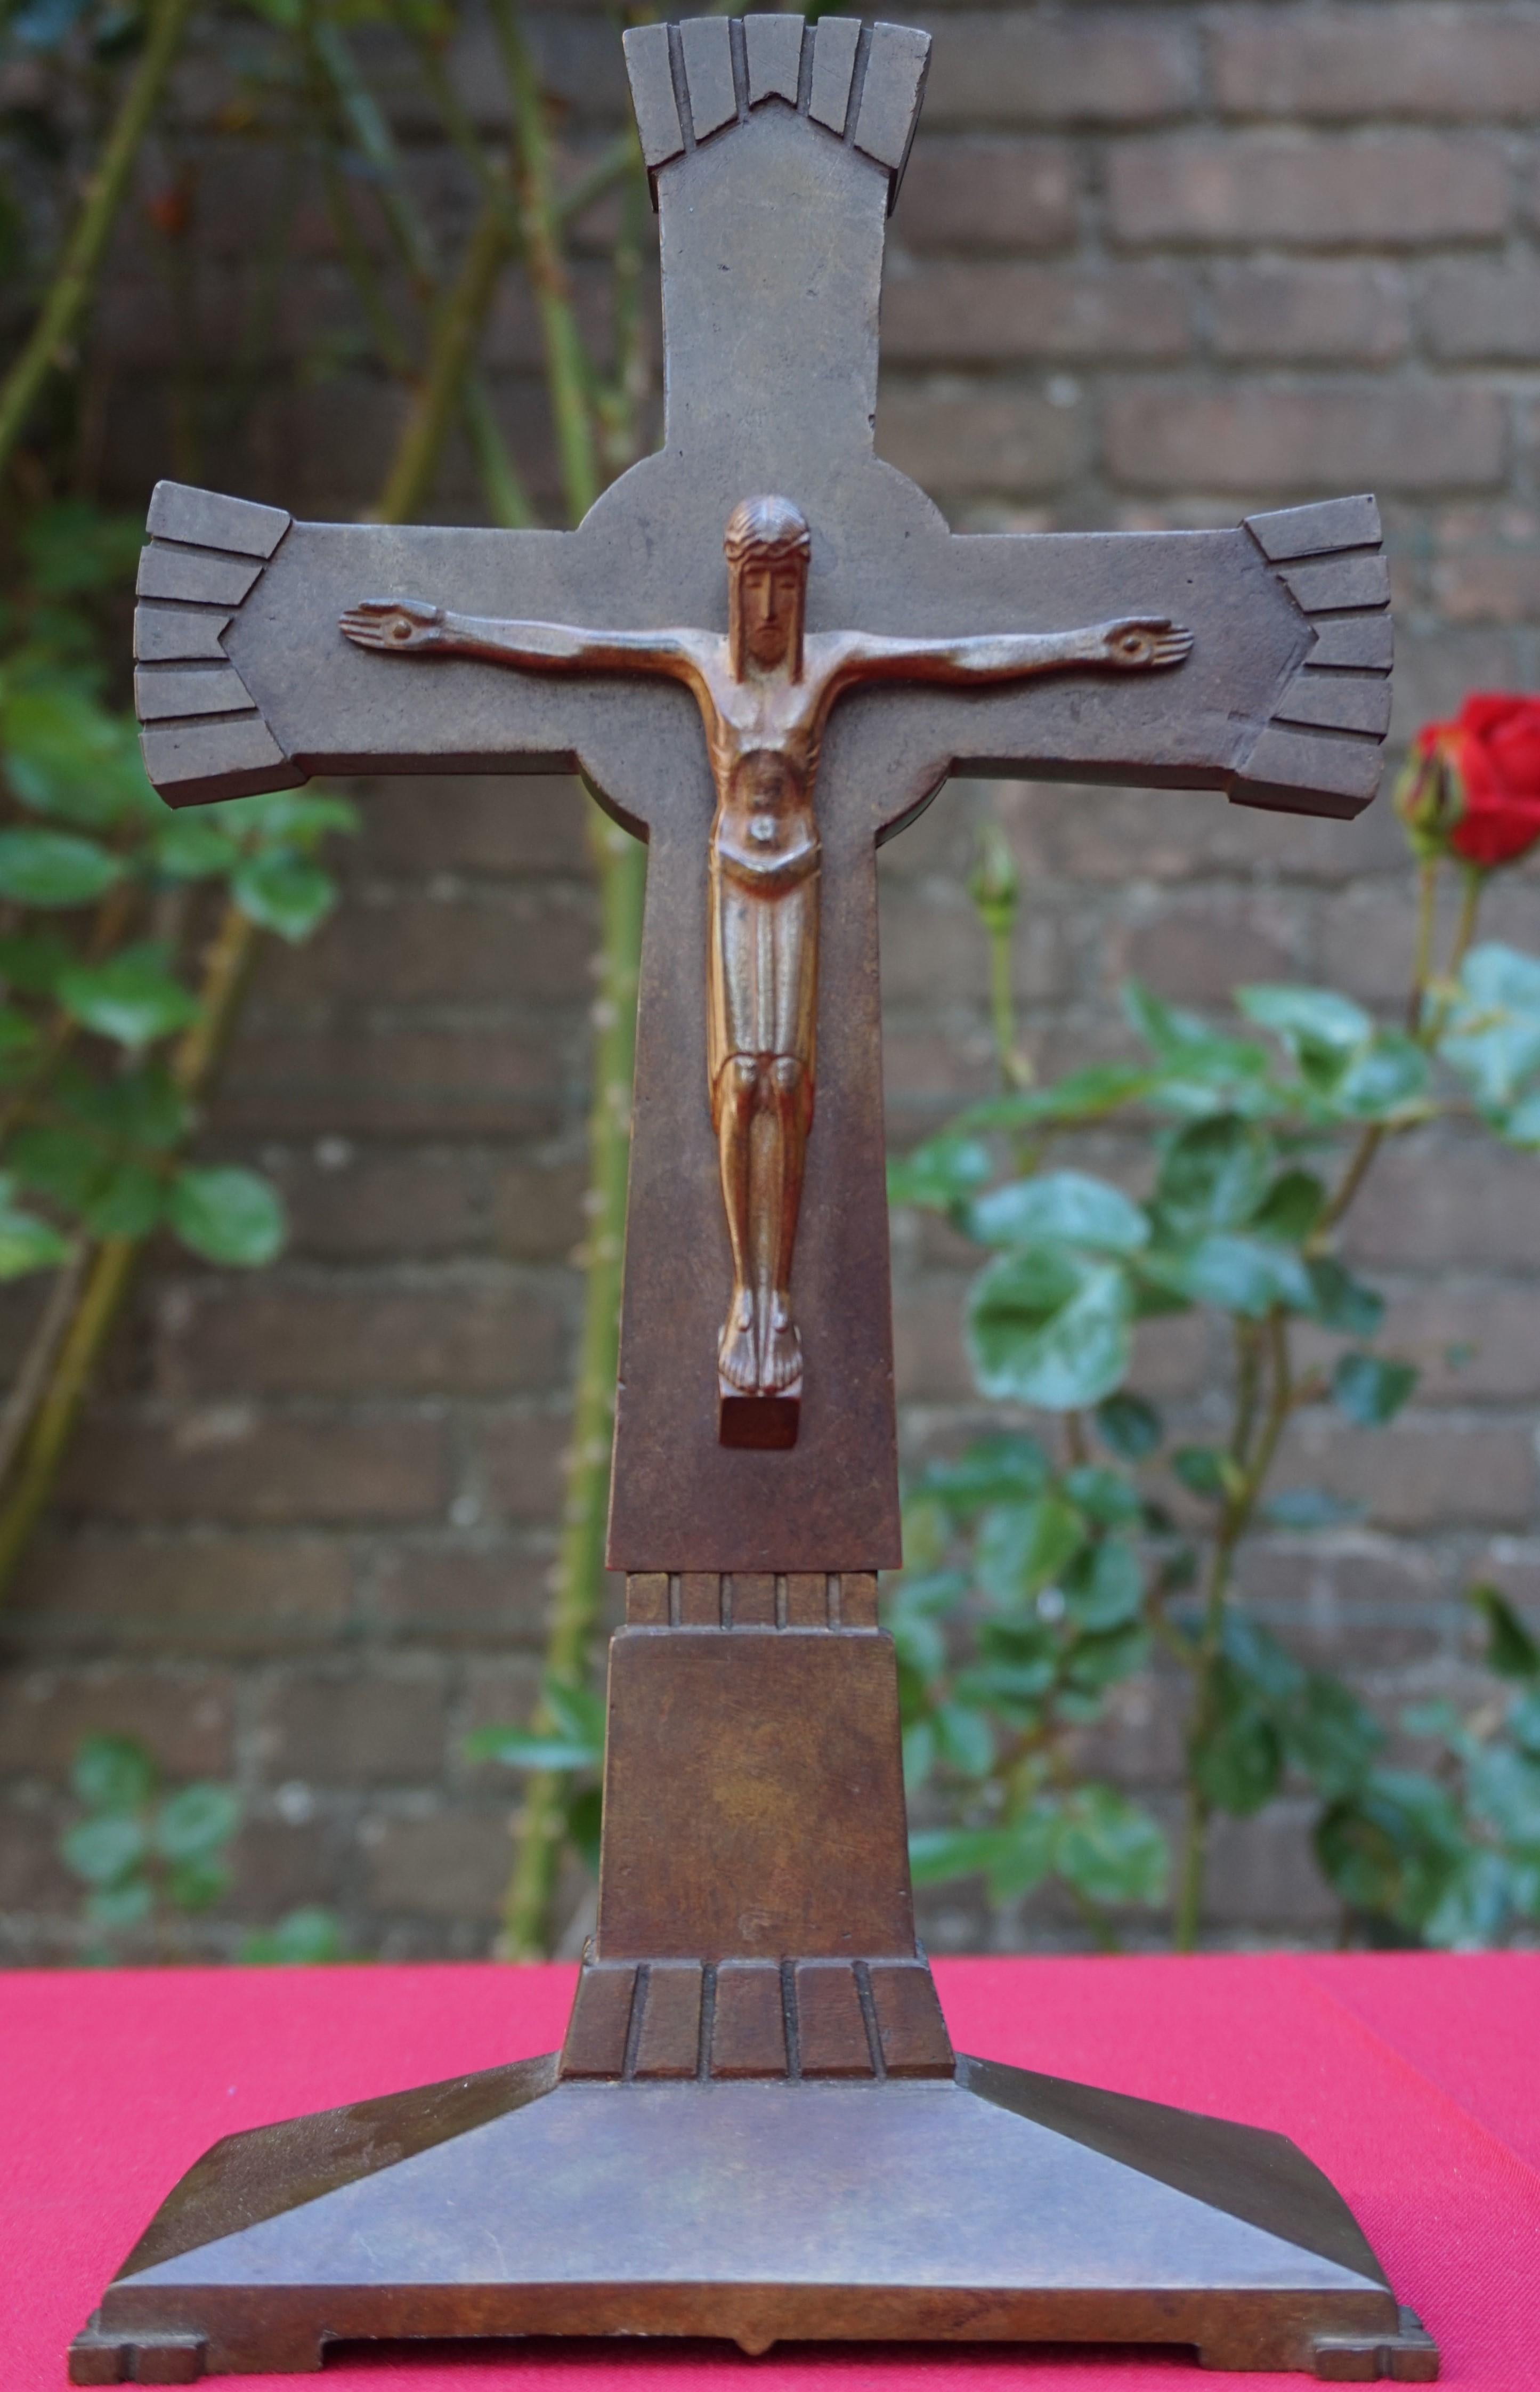 Unique and marked Art Deco crucifix.

If you are looking for a unique and meaningful antique to give expression to your faith in the life and teachings of Jesus Christ then this Art Deco crucifix could be yours to own. The unique, symmetrical cross